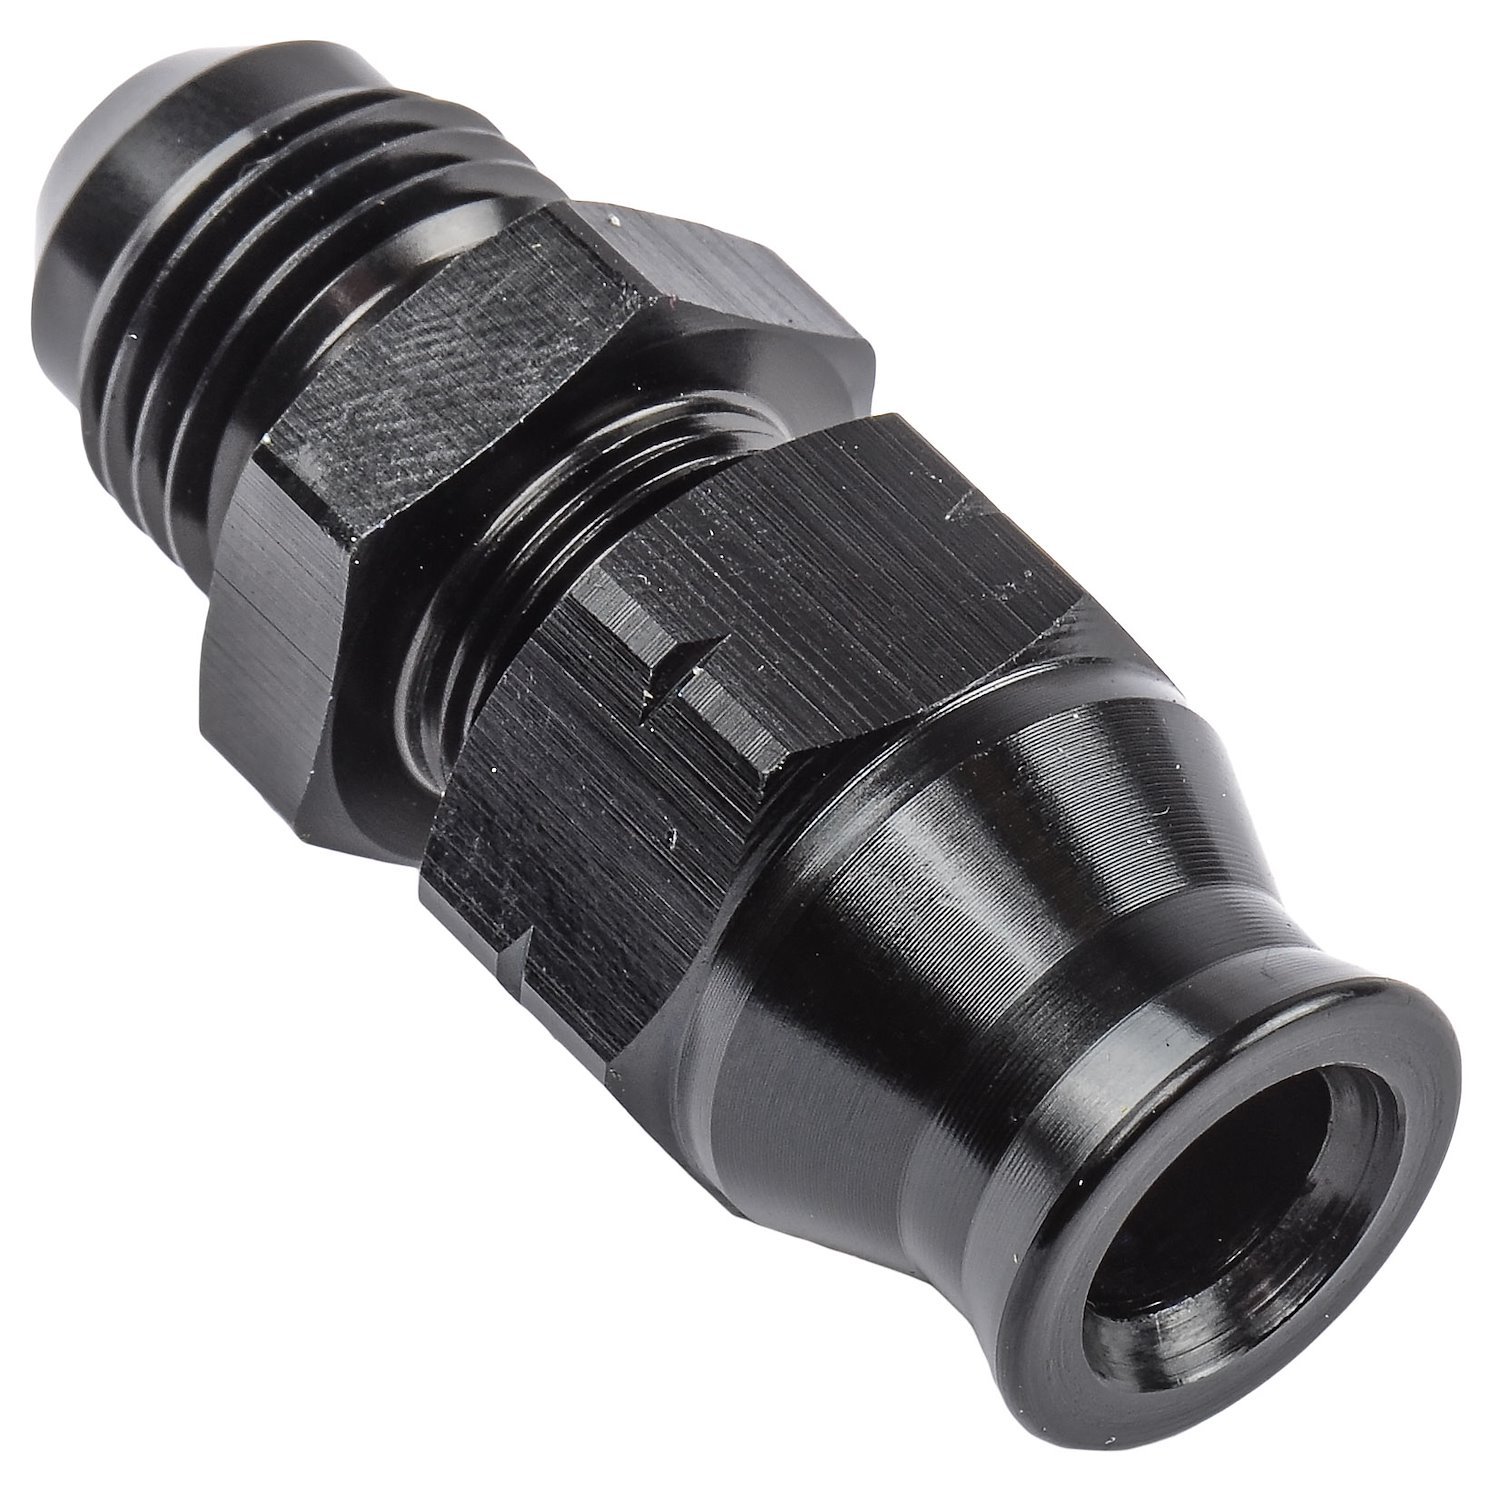 COUPLER FITTING 6AN Male TO 6AN Male WITH LOCK NUT  REGULATOR FUEL PUMP BLack